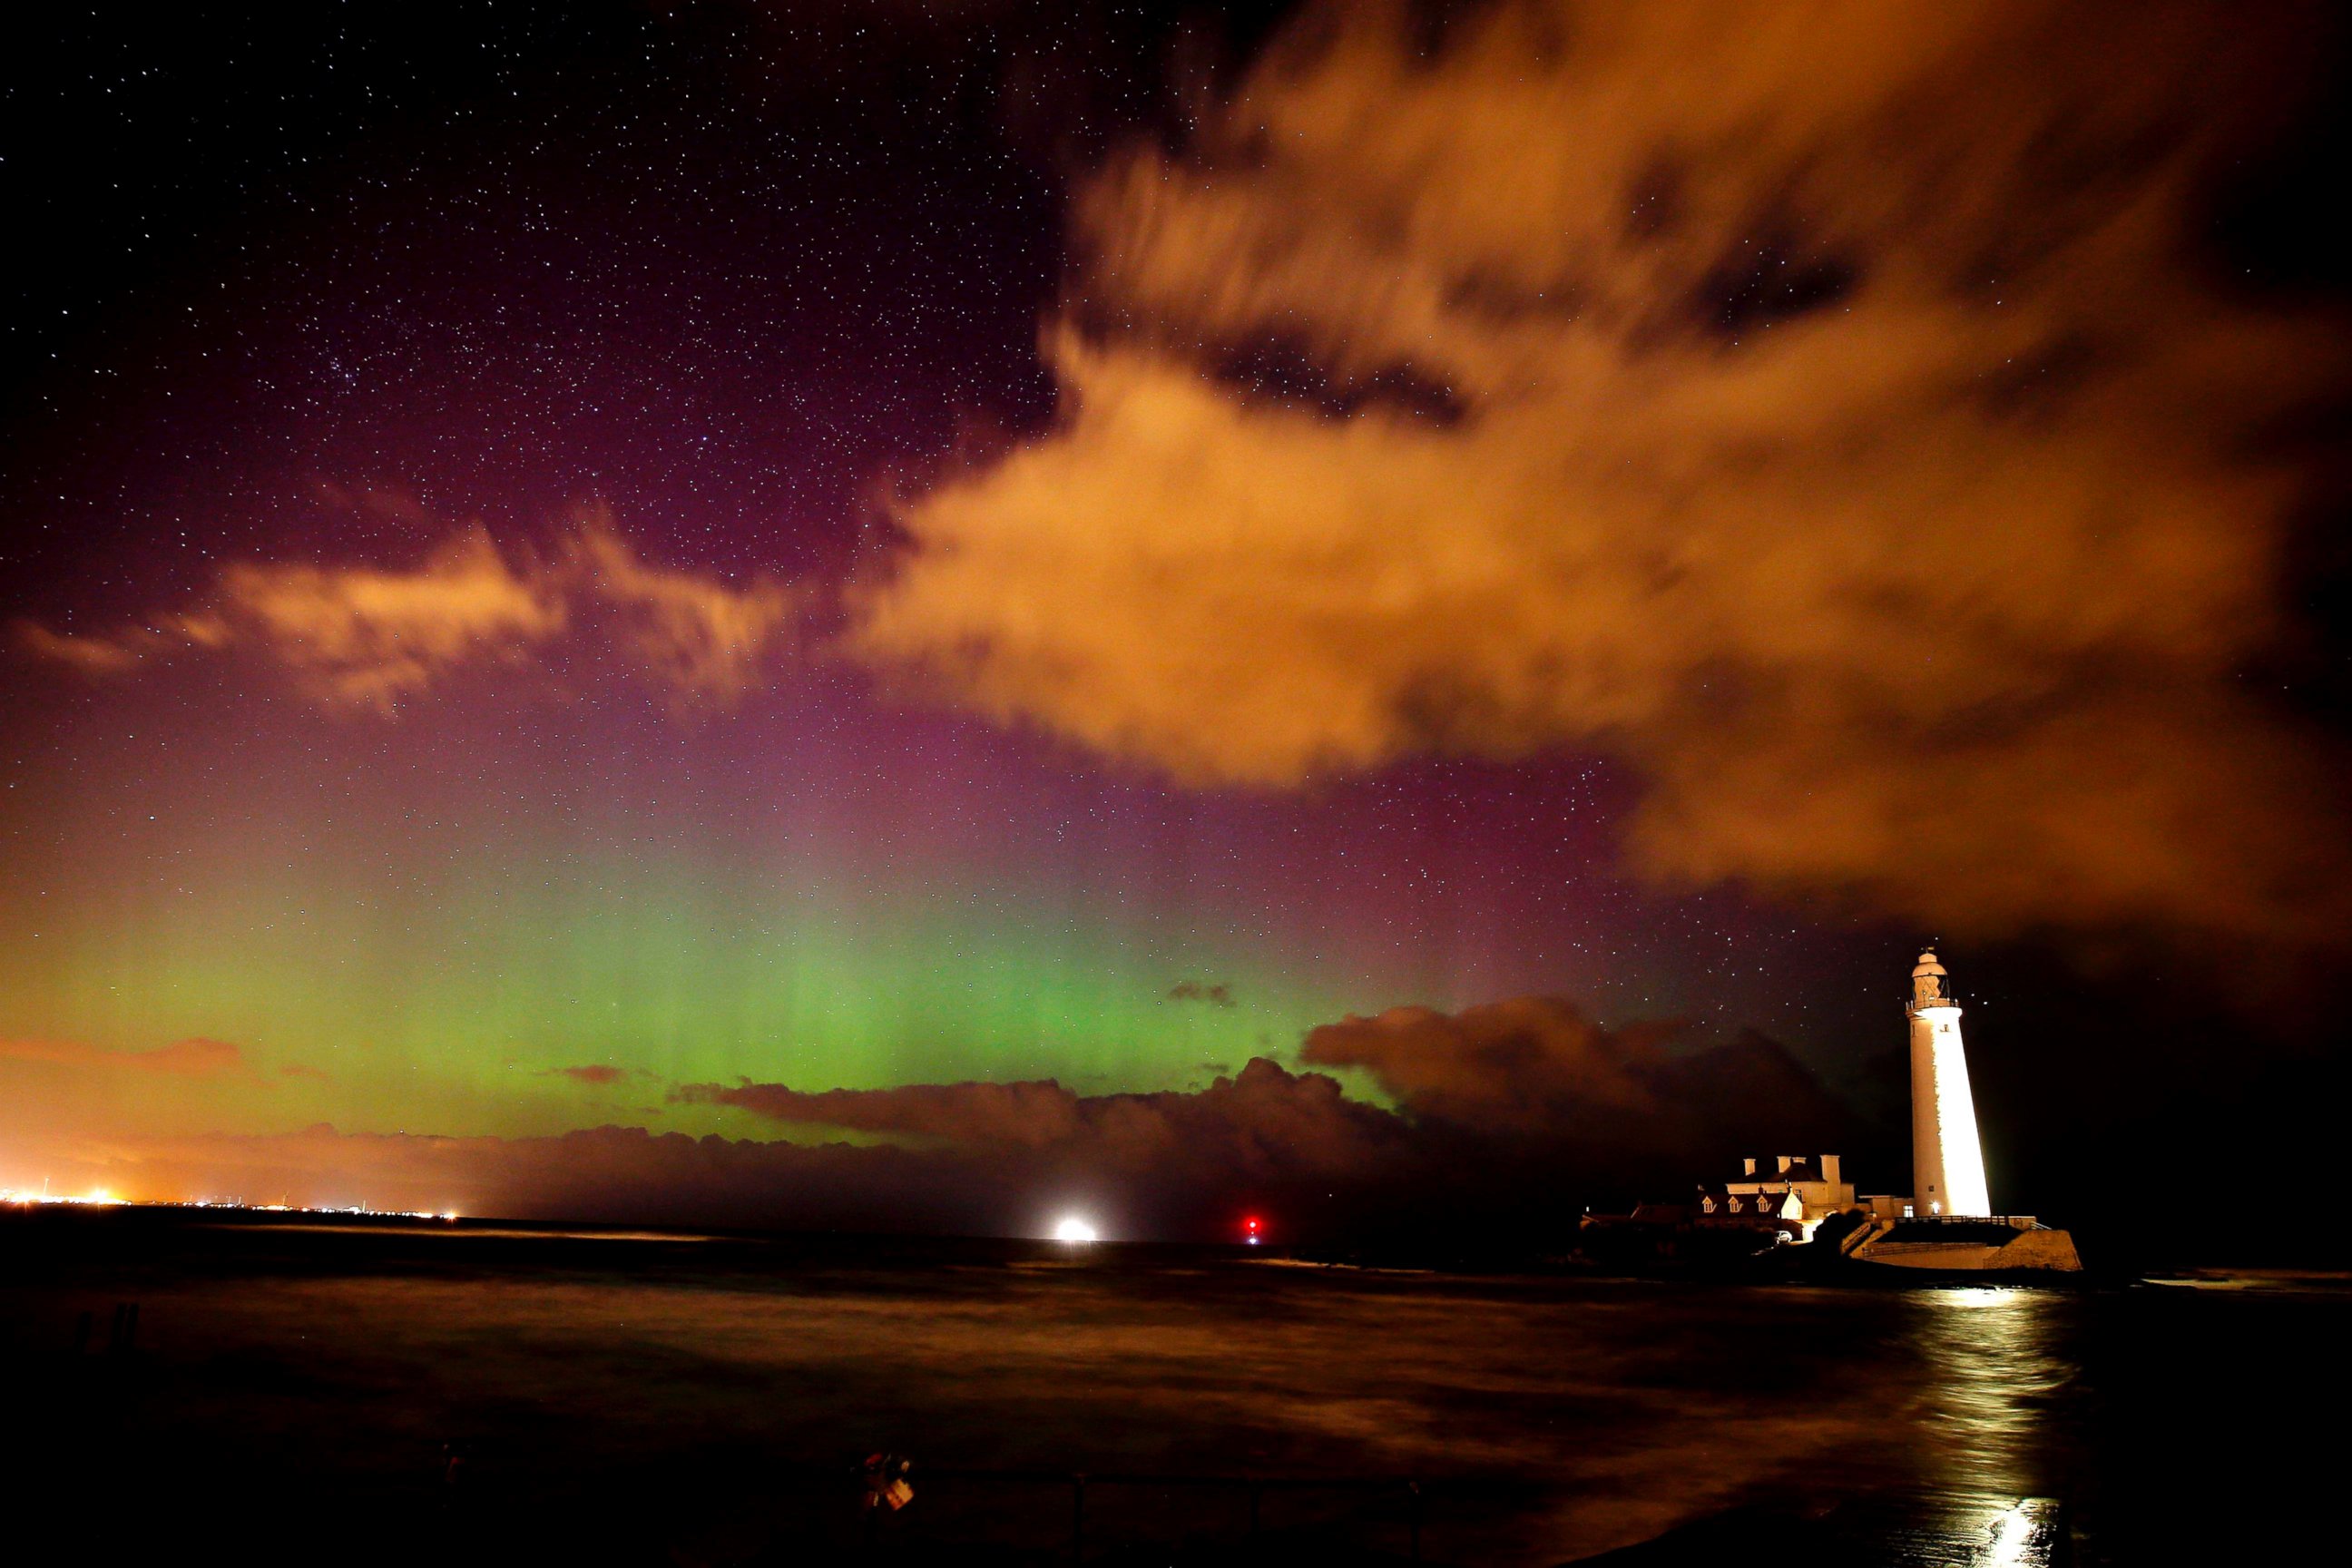 PHOTO: The Northern Lights, or Aurora Borealis, shine over St Marys Lighthouse near Whitley Bay in Northumberland, northeast England early March 7, 2016.